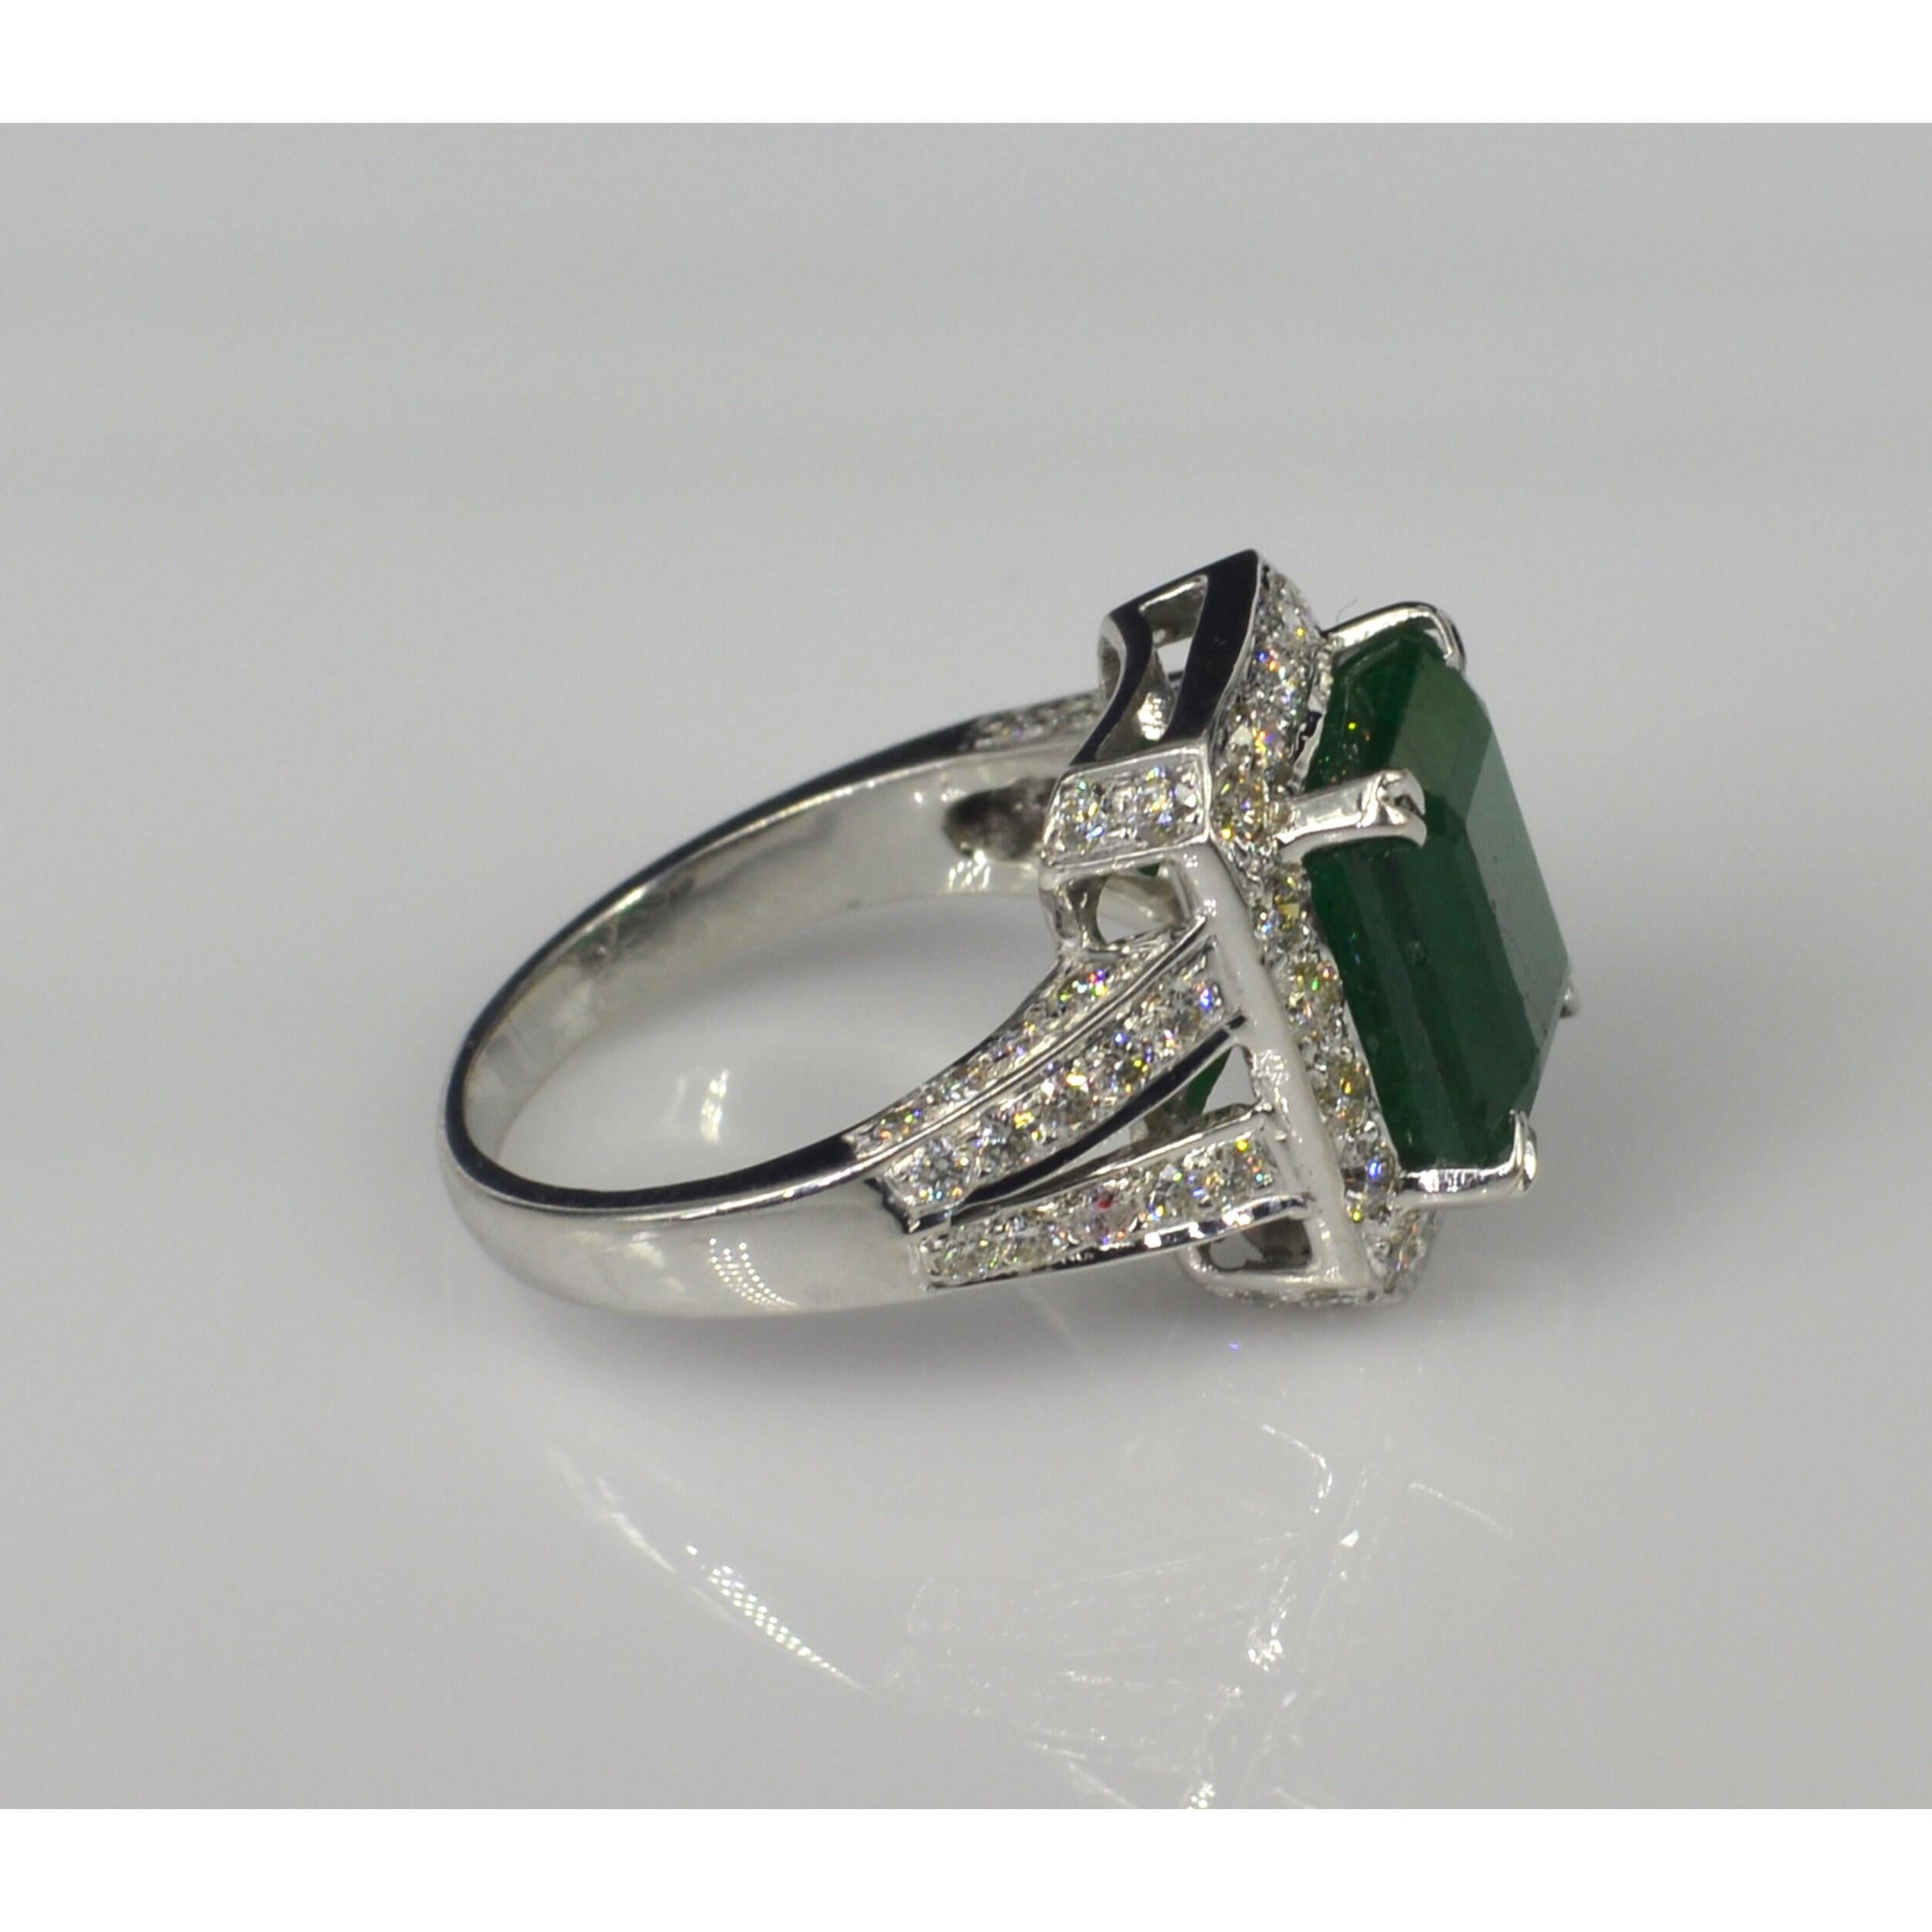 For Sale:  5 Carat Emerald Diamond Engagement Ring, Emerald Statement Ring 5